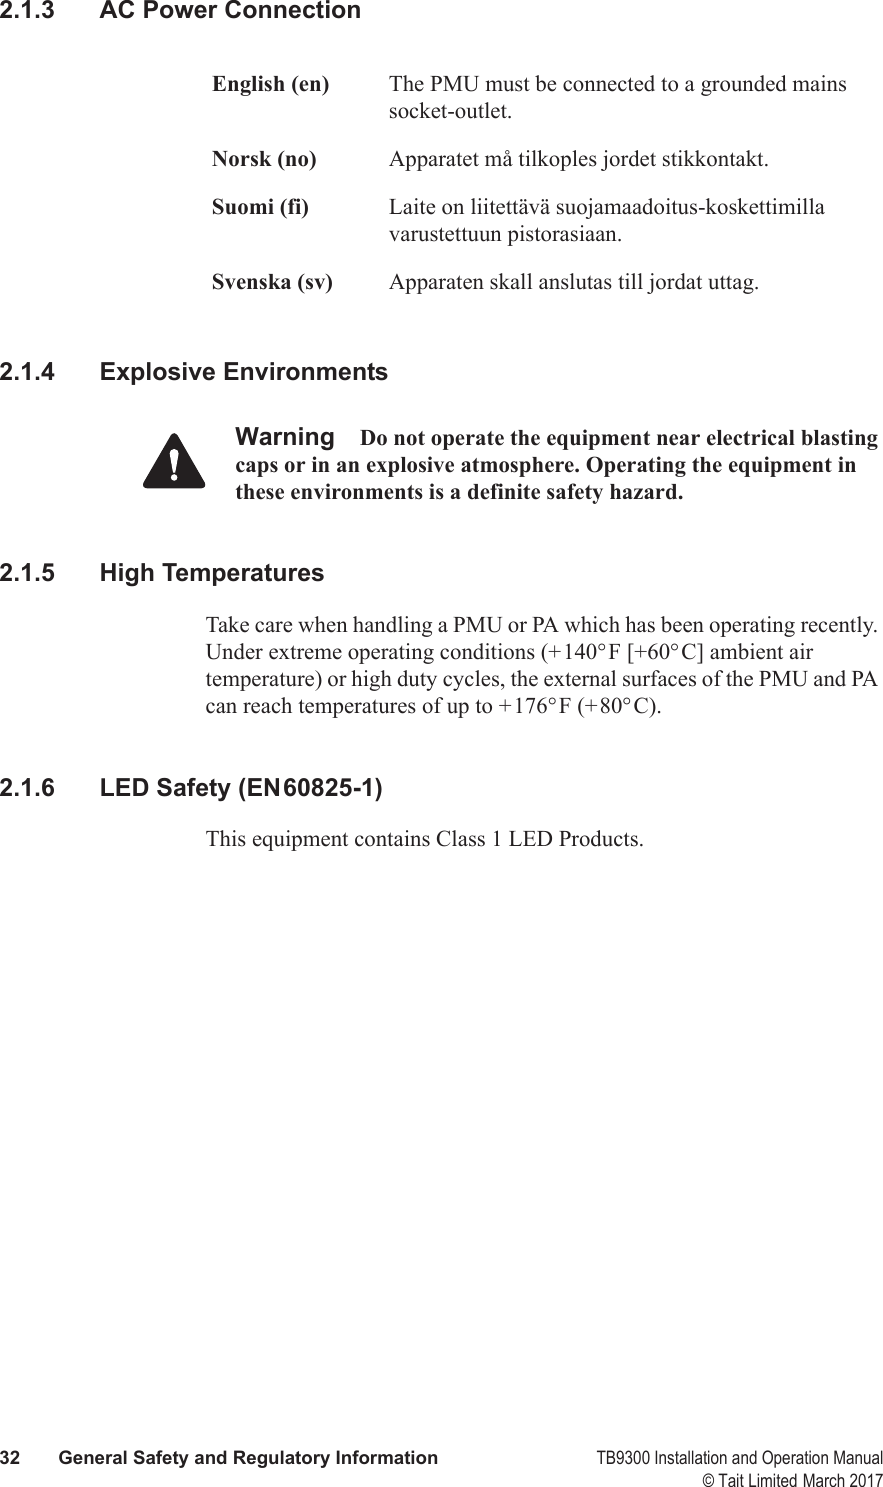  32 General Safety and Regulatory Information TB9300 Installation and Operation Manual© Tait Limited March 20172.1.3 AC Power Connection2.1.4 Explosive EnvironmentsWarning Do not operate the equipment near electrical blasting caps or in an explosive atmosphere. Operating the equipment in these environments is a definite safety hazard.2.1.5 High TemperaturesTake care when handling a PMU or PA which has been operating recently. Under extreme operating conditions (+140°F [+60°C] ambient air temperature) or high duty cycles, the external surfaces of the PMU and PA can reach temperatures of up to +176°F (+80°C).2.1.6 LED Safety (EN60825-1)This equipment contains Class 1 LED Products.English (en) The PMU must be connected to a grounded mains socket-outlet.Norsk (no) Apparatet må tilkoples jordet stikkontakt.Suomi (fi) Laite on liitettävä suojamaadoitus-koskettimilla varustettuun pistorasiaan.Svenska (sv) Apparaten skall anslutas till jordat uttag.